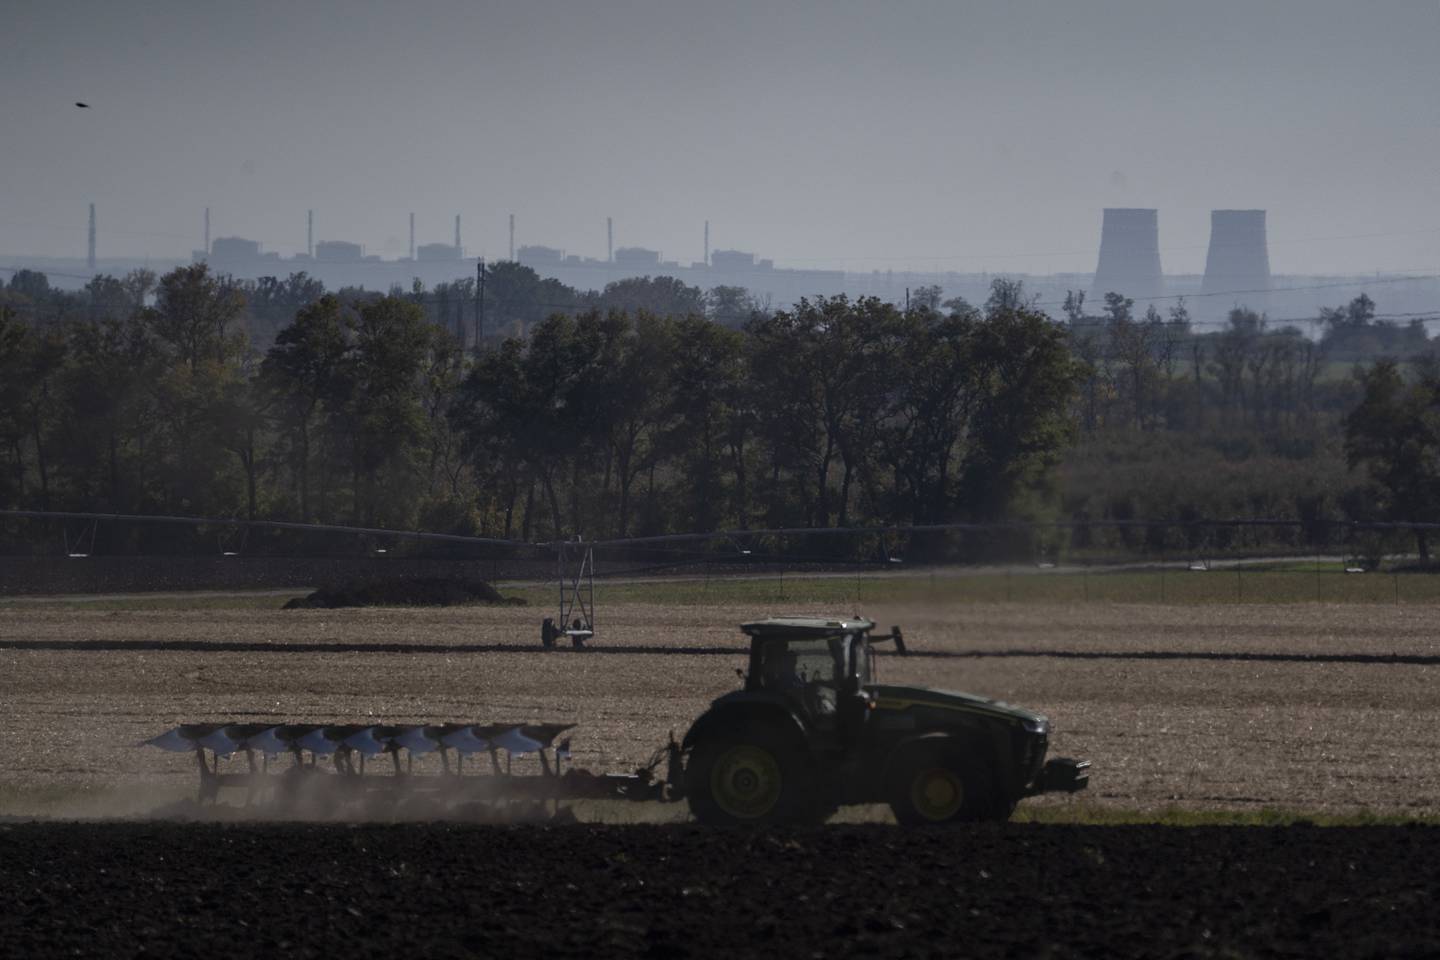 Zaporizhzhia nuclear power plant is seen from 20 kilometres away, in Dnipropetrovsk, Ukraine, on October 17. AP